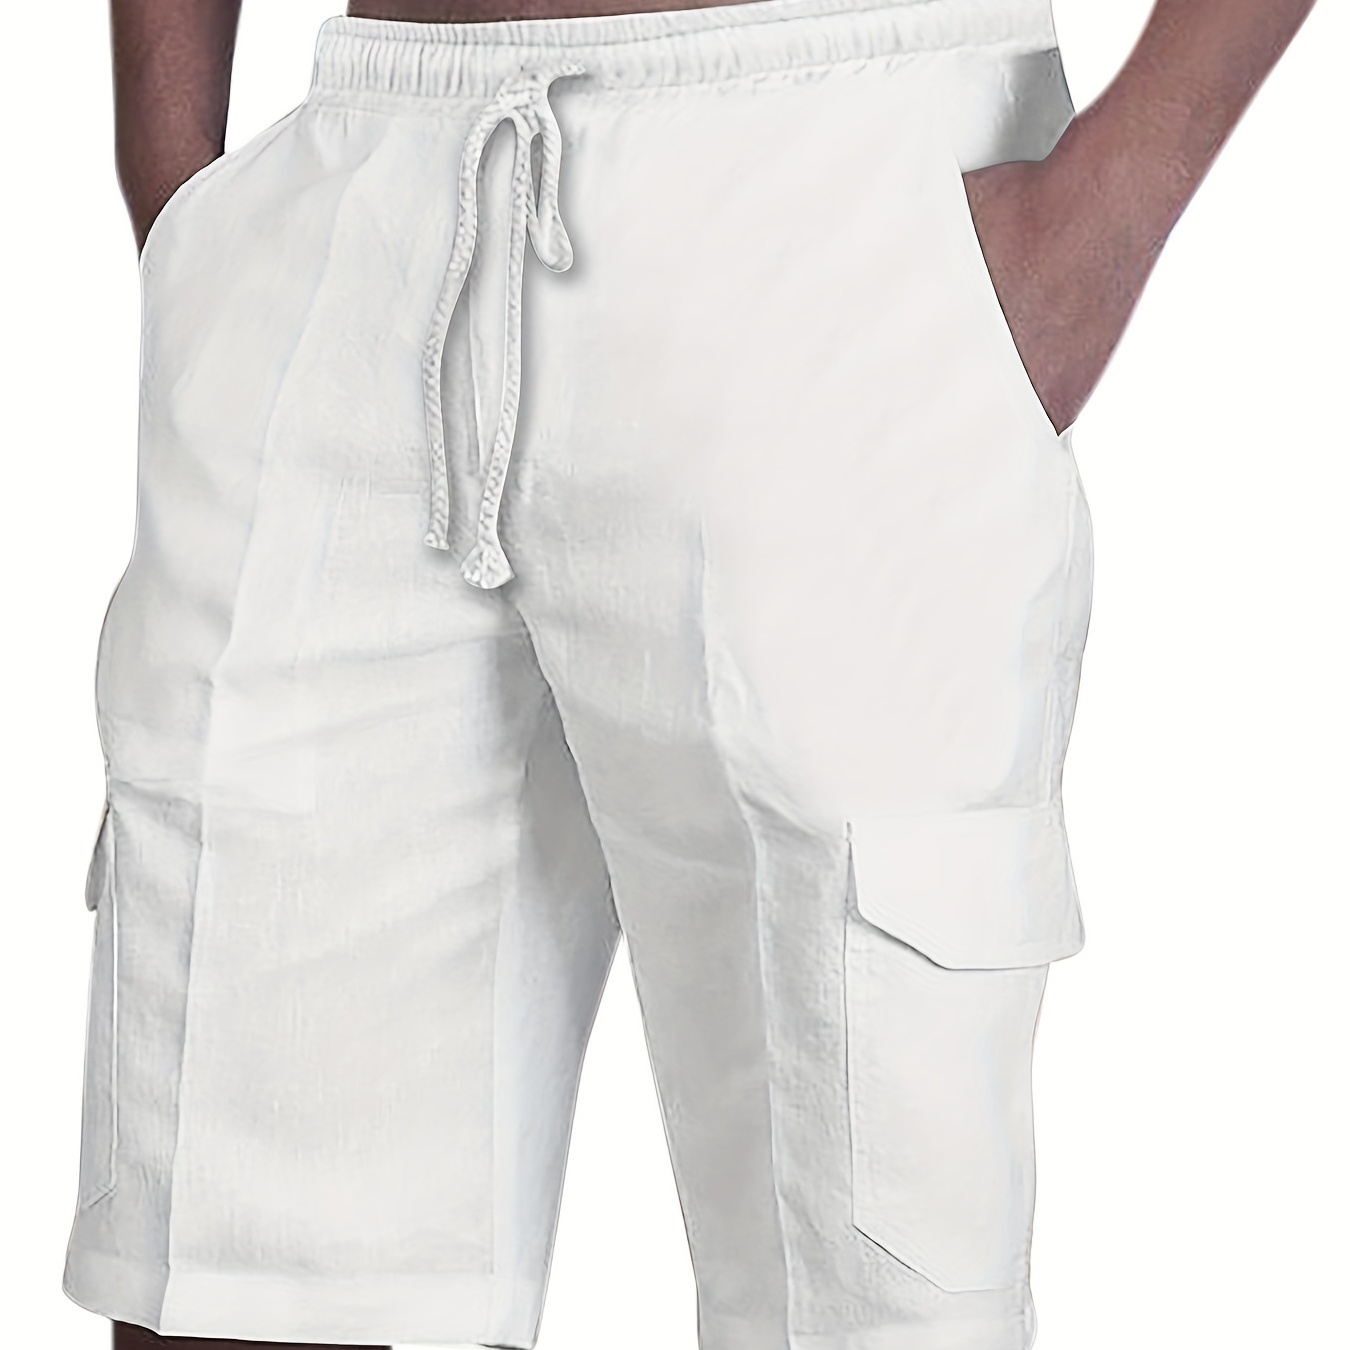 

Solid Color Men's Drawstring Cargo Short Pants With Flap Pockets, Loose Trendy Shorts, Men's Work Pants For Outdoor